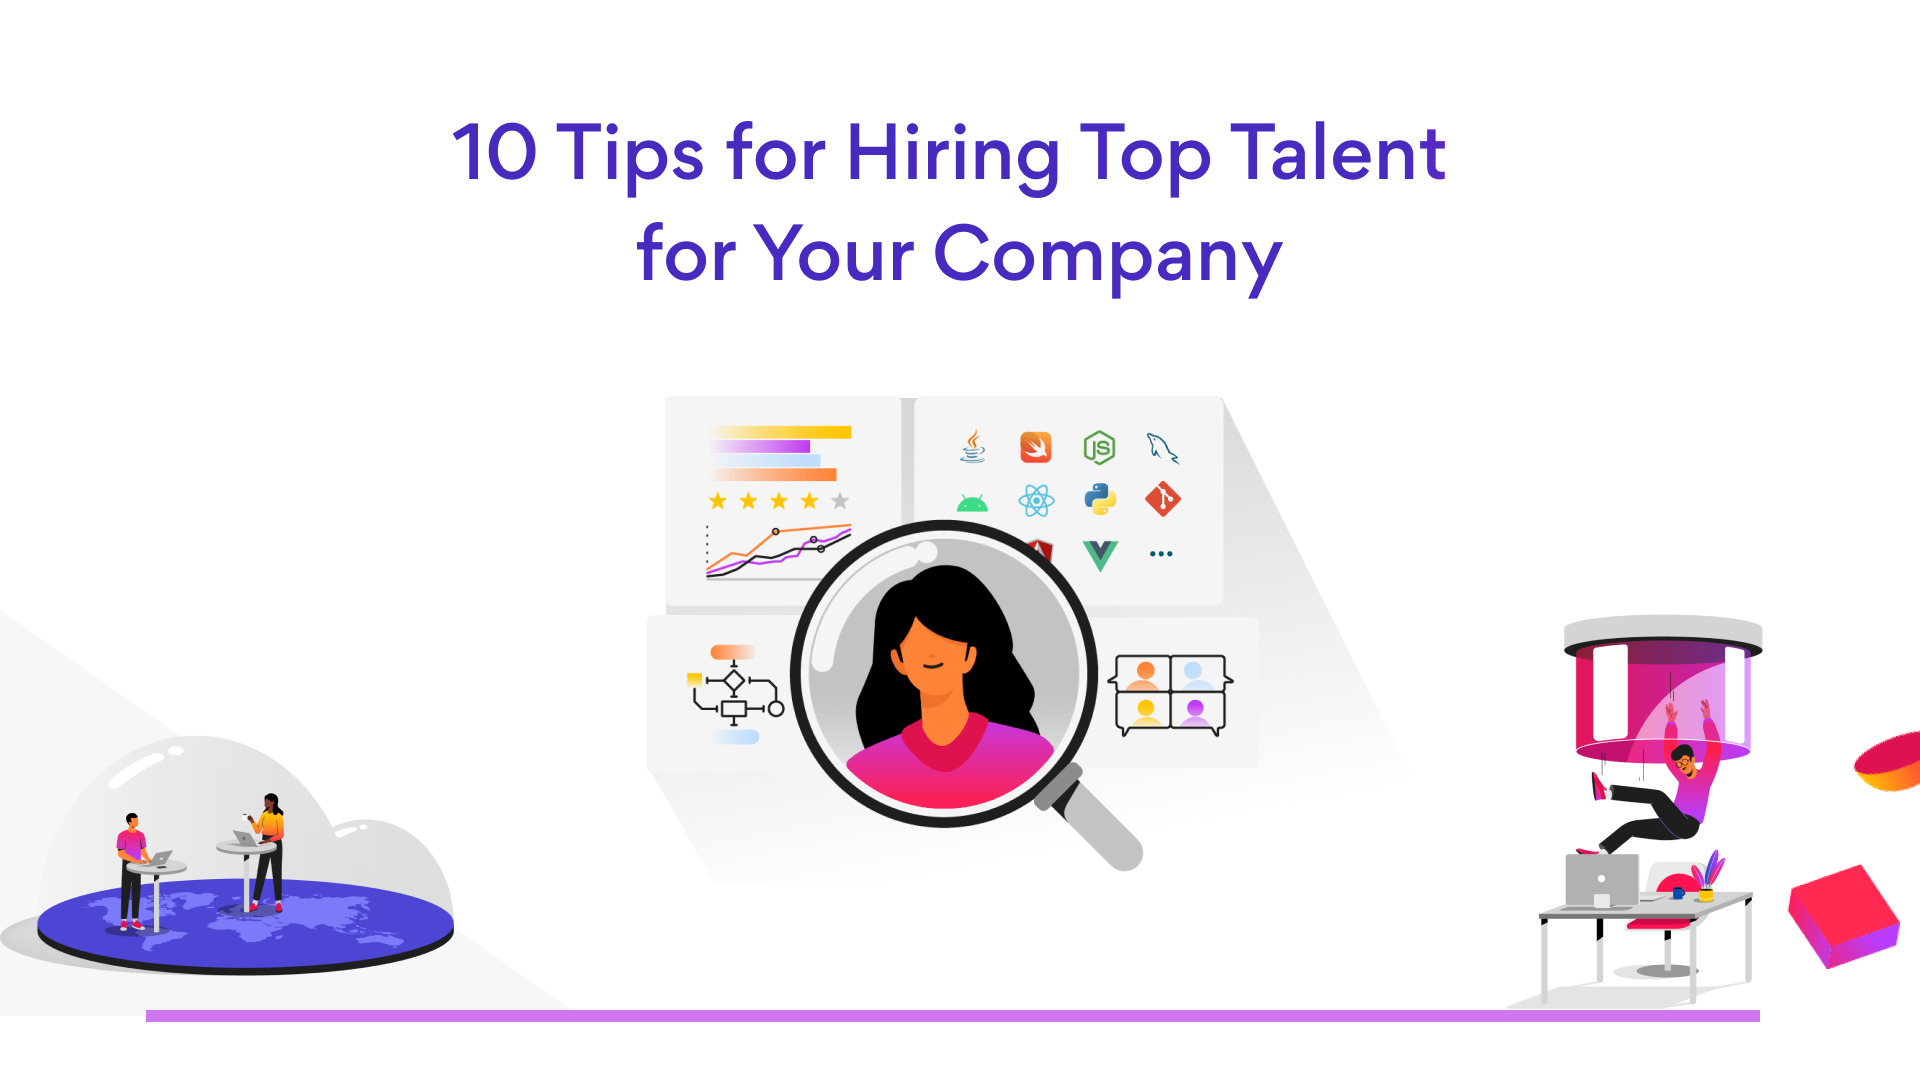 10 Tips for Hiring Top Talent for Your Company